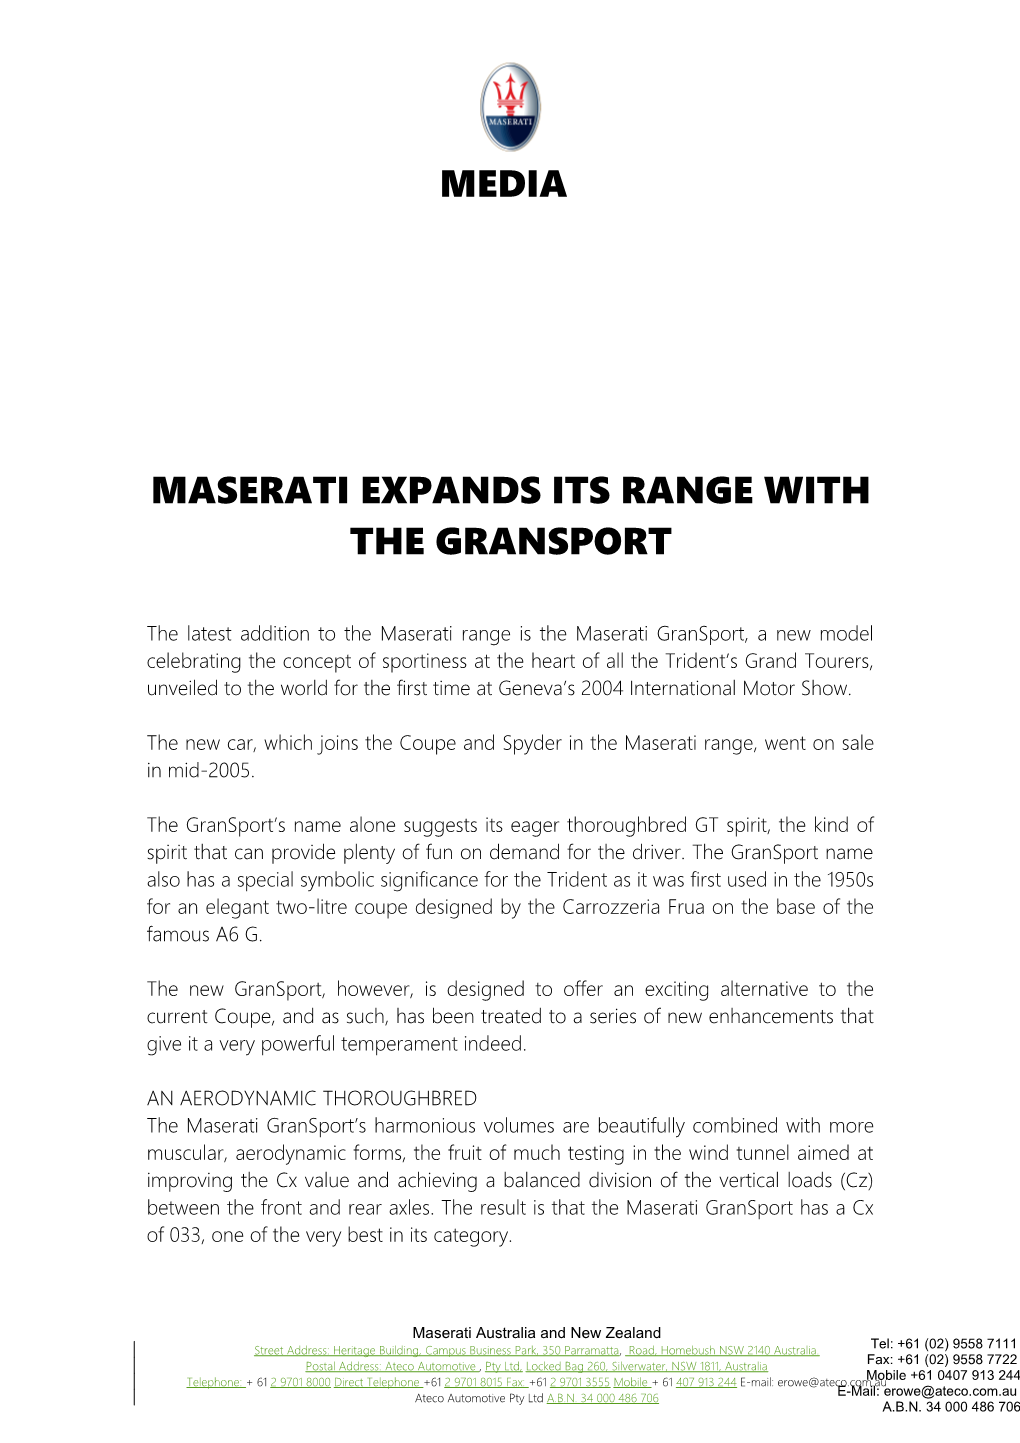 Maserati Expands Its Range with the Gransport